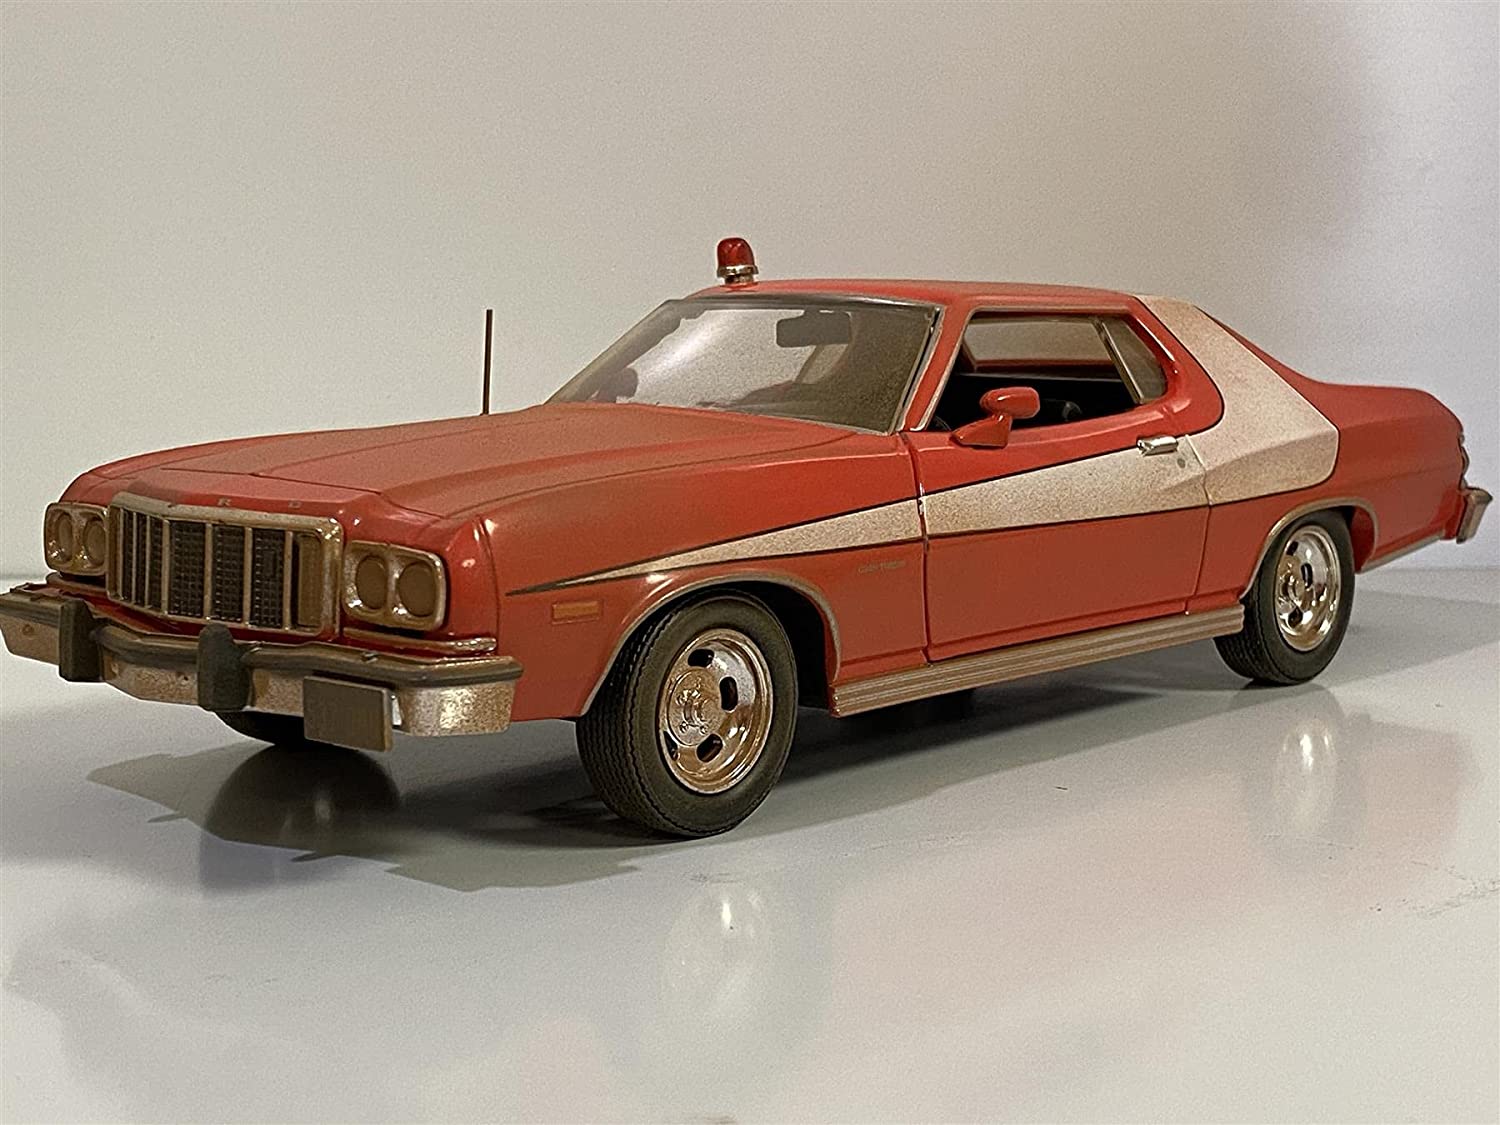 Starsky & Hutch 1976 Grand Torino - Weathered Look 1:24 Scale Die Cast Model